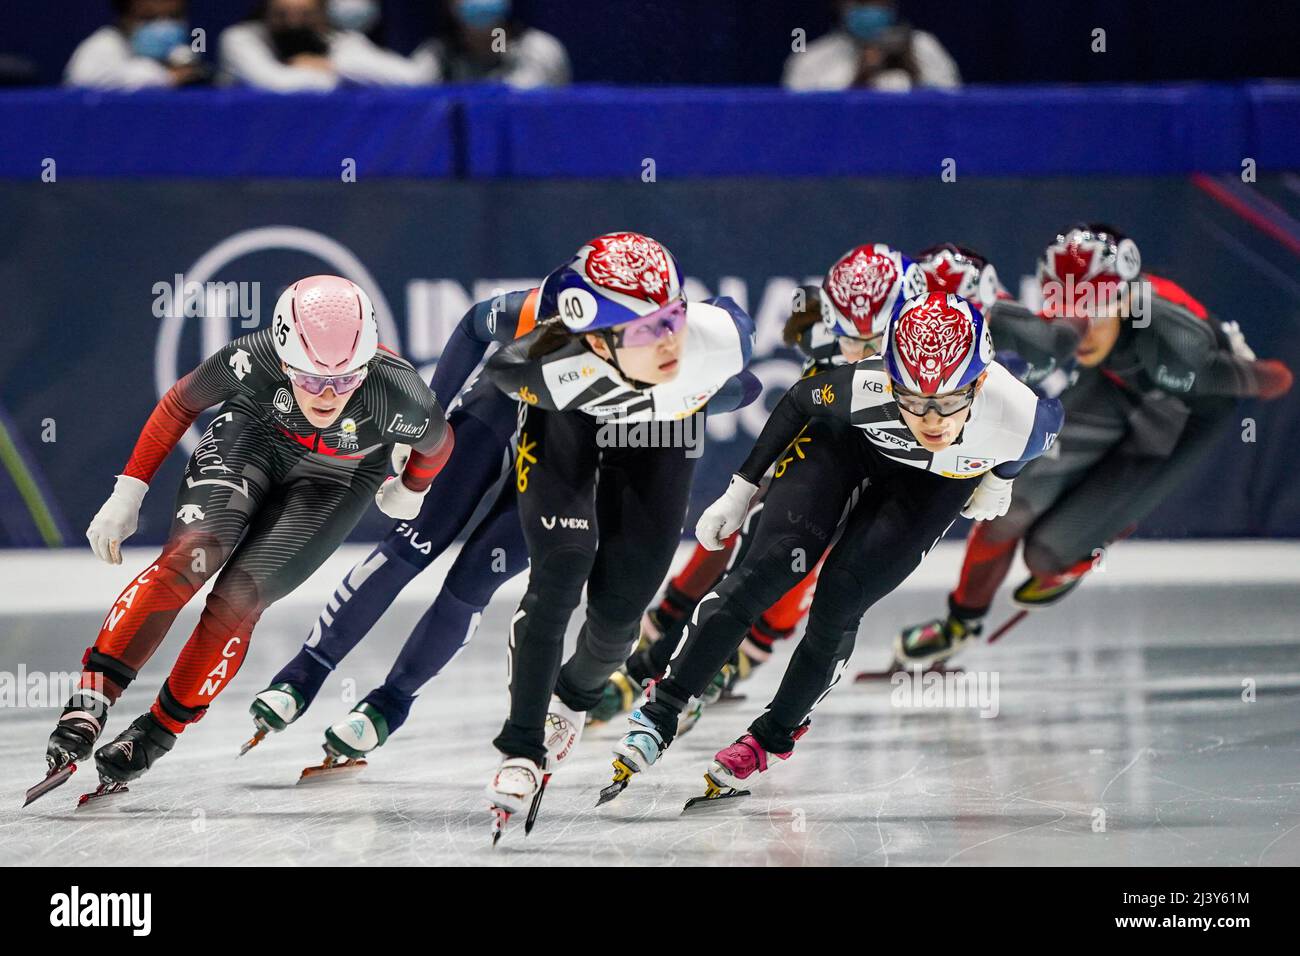 MONTREAL, CANADA - APRIL 10: Kim Boutin of Canada during Day 3 of the ISU World Short Track Championships at the Maurice Richard Arena on April 10, 2022 in Montreal, Canada (Photo by Andre Weening/Orange Pictures) Stock Photo